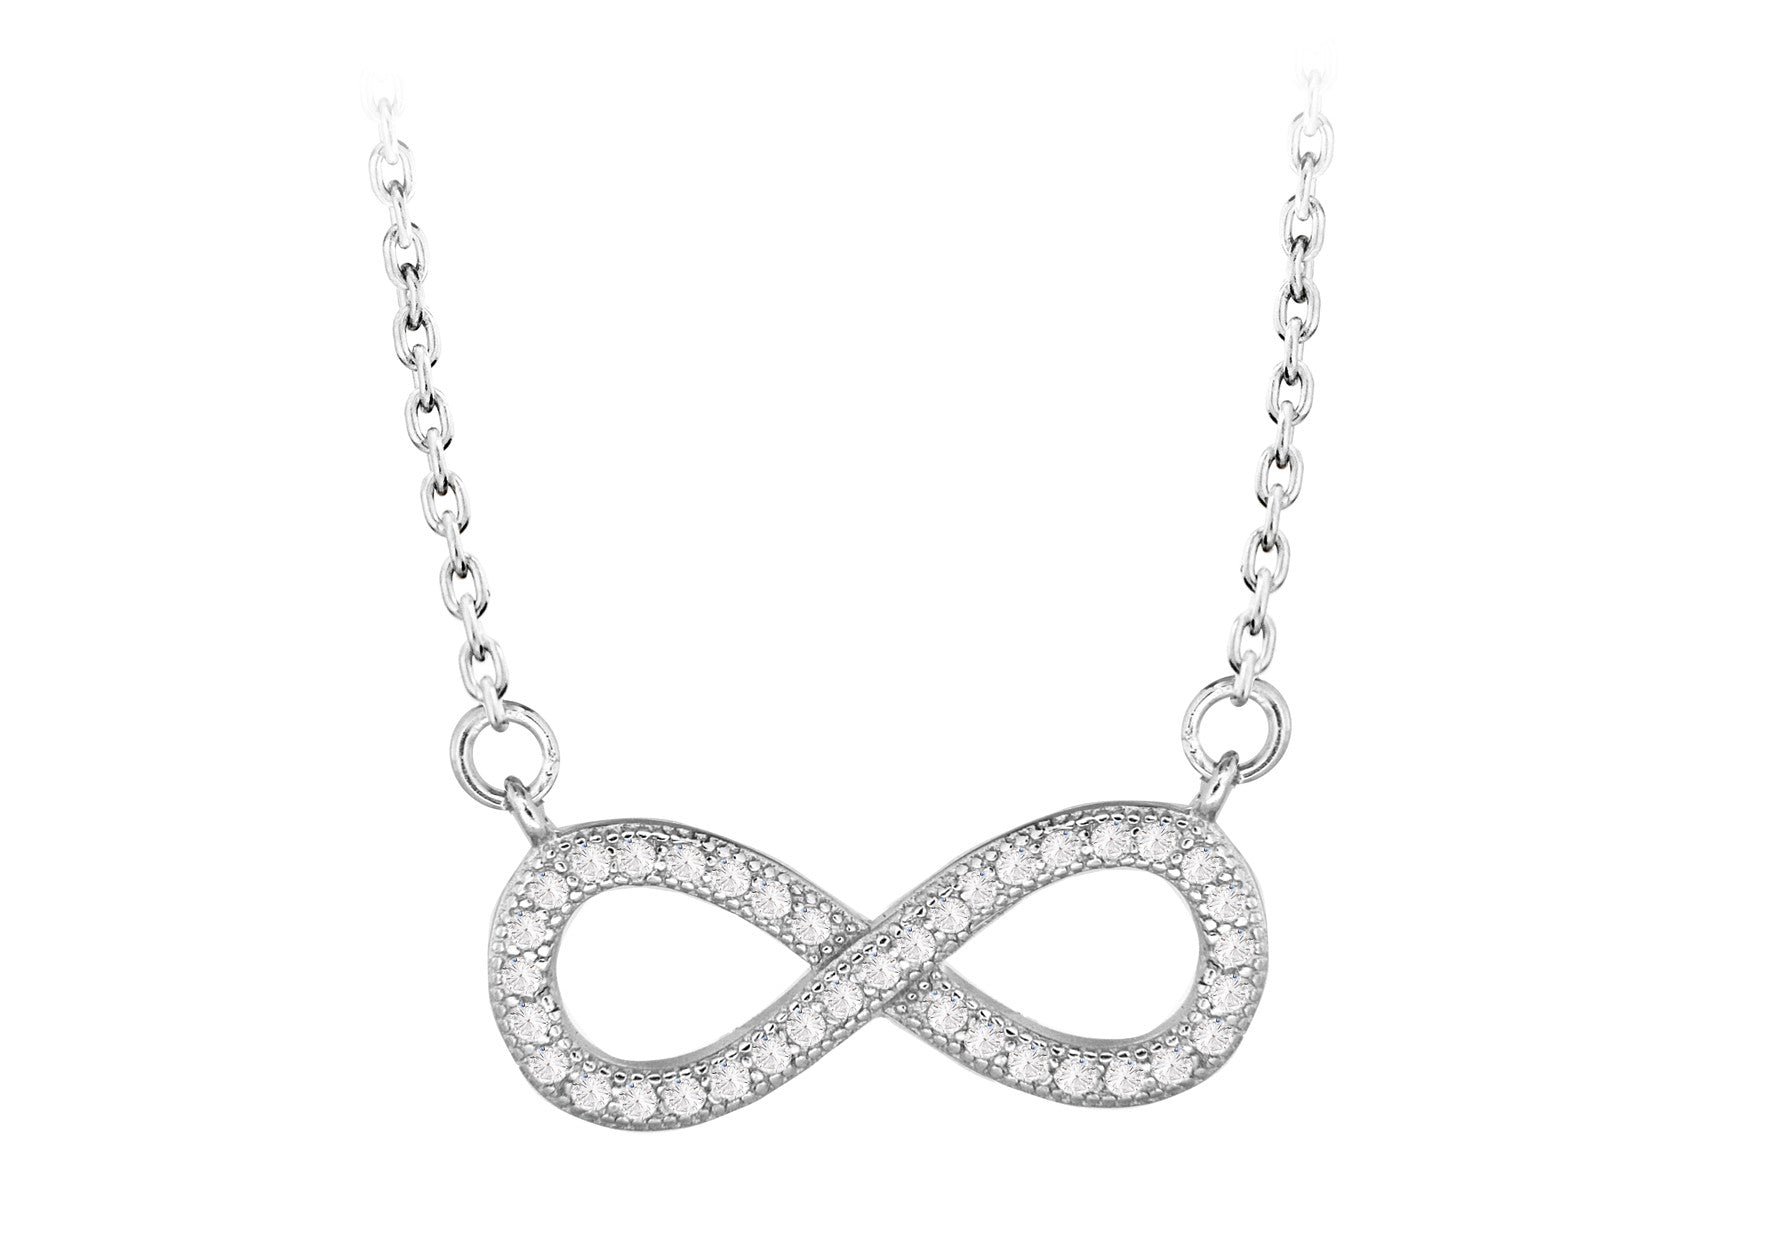 Sterling Silver CZ Infinity Necklace